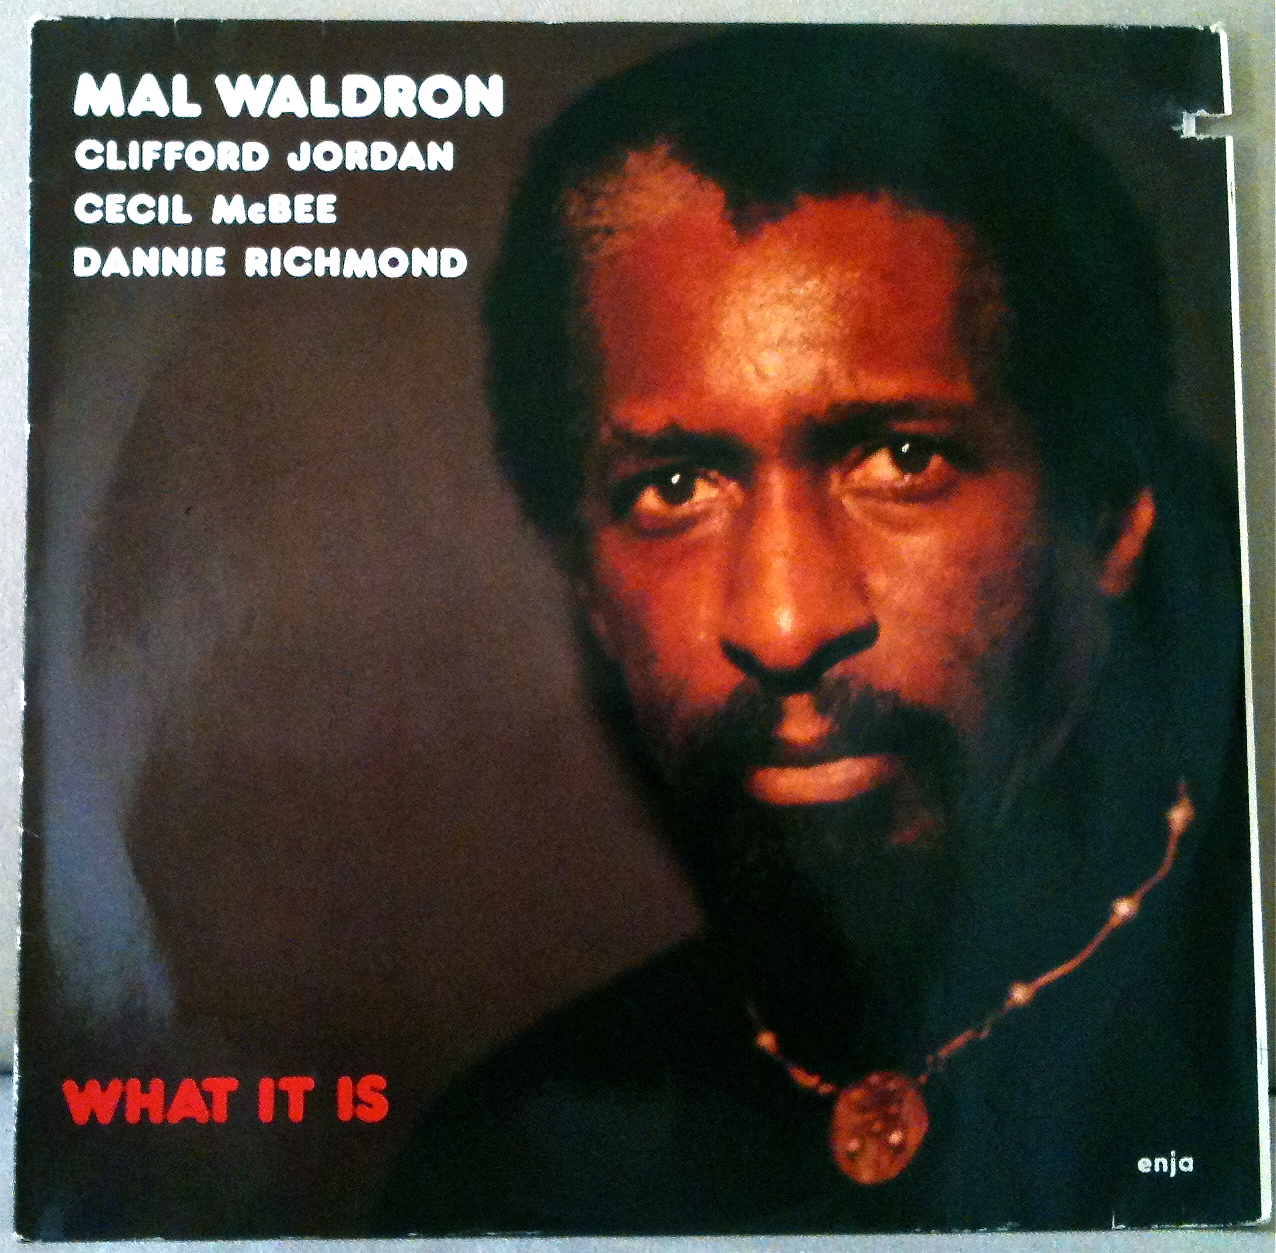 On Mal Waldron | DO THE M@TH